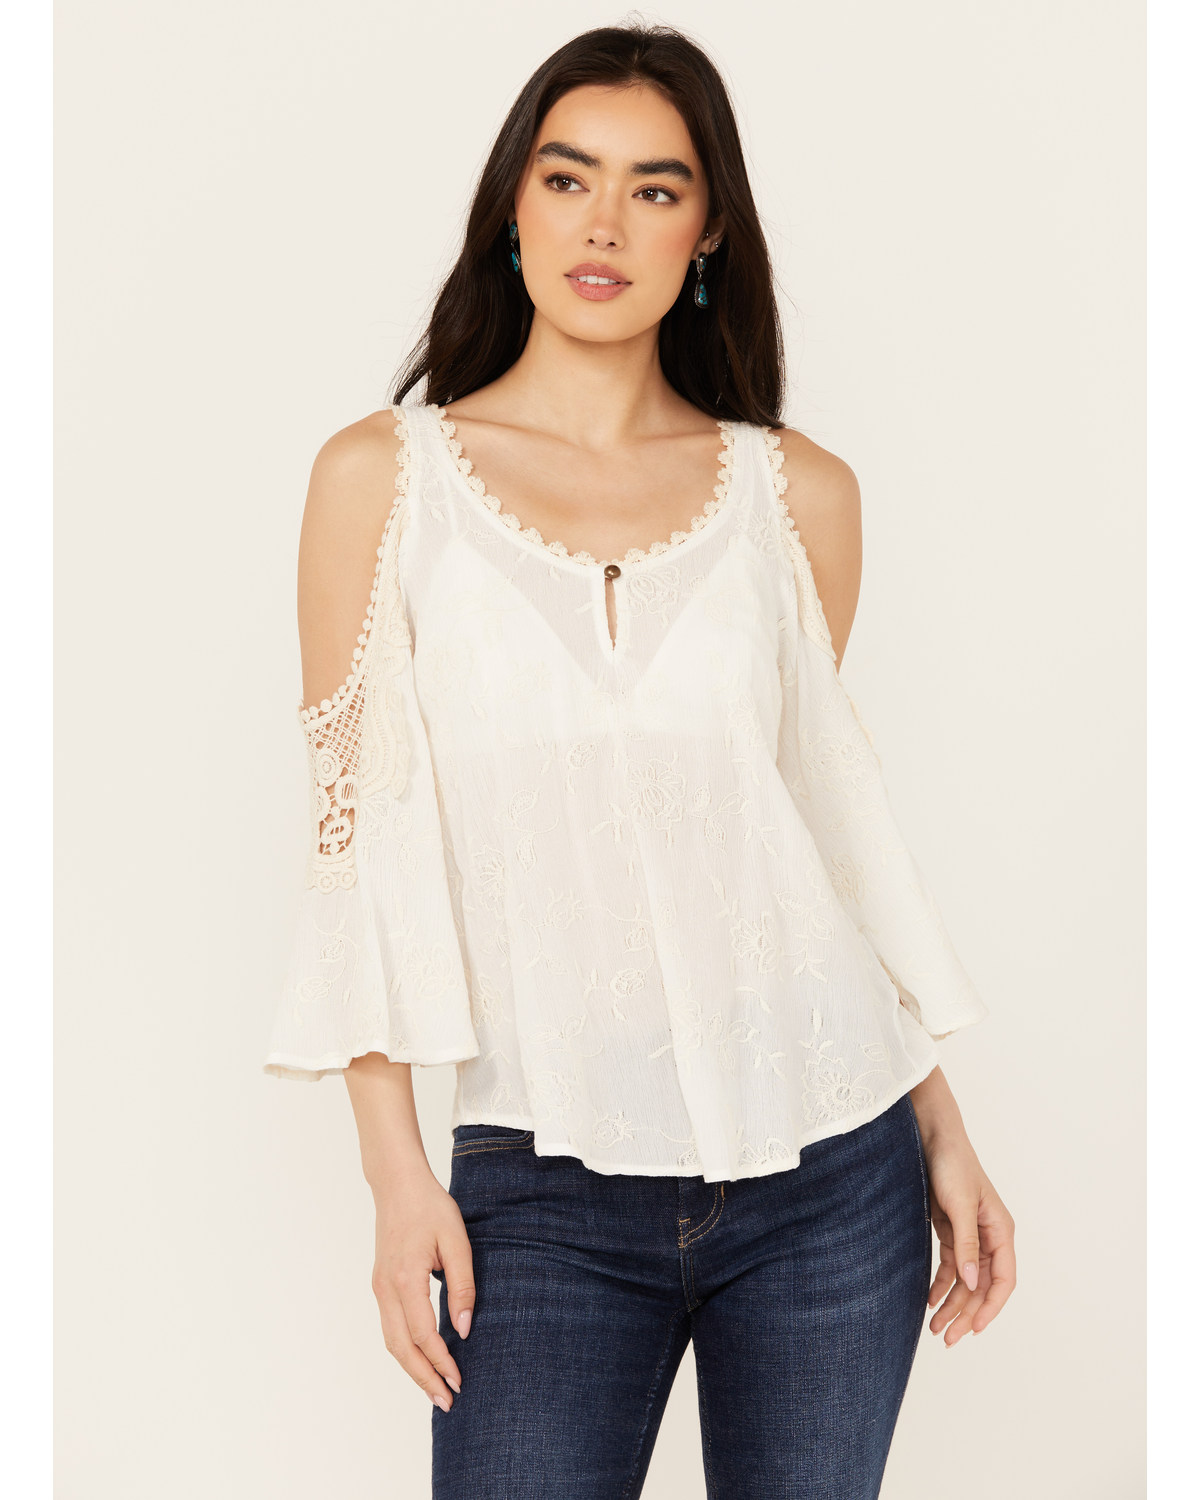 Wild Moss Women's Embroidered Cold Shoulder Top